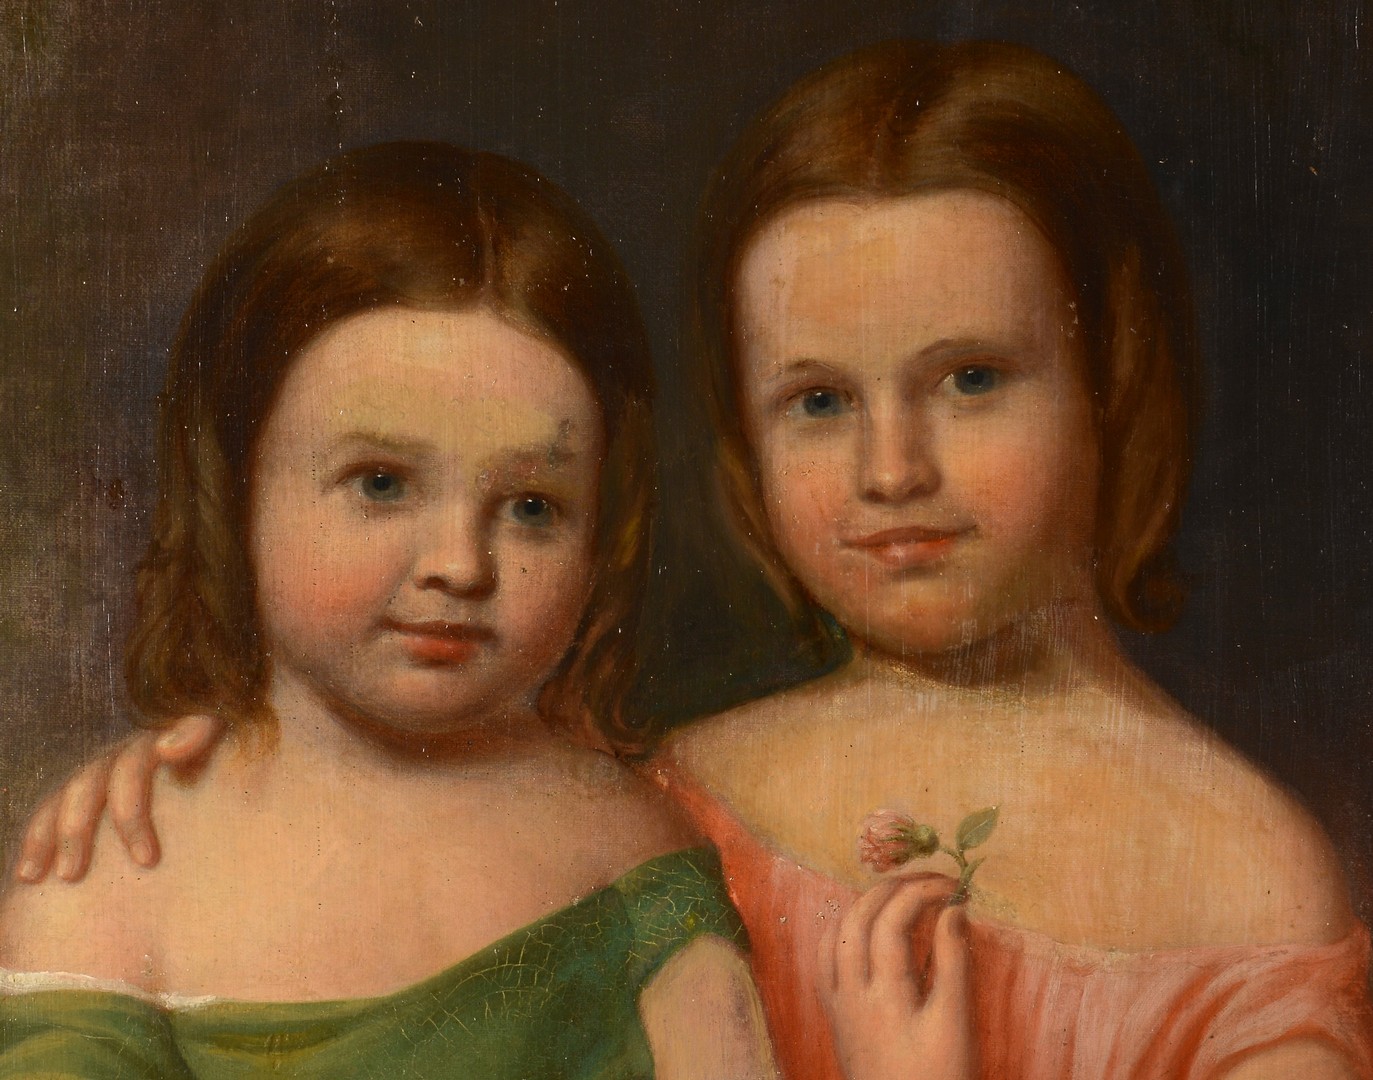 Lot 537: Oval Oil on Portrait of 2 Young Girls w/ Flowers